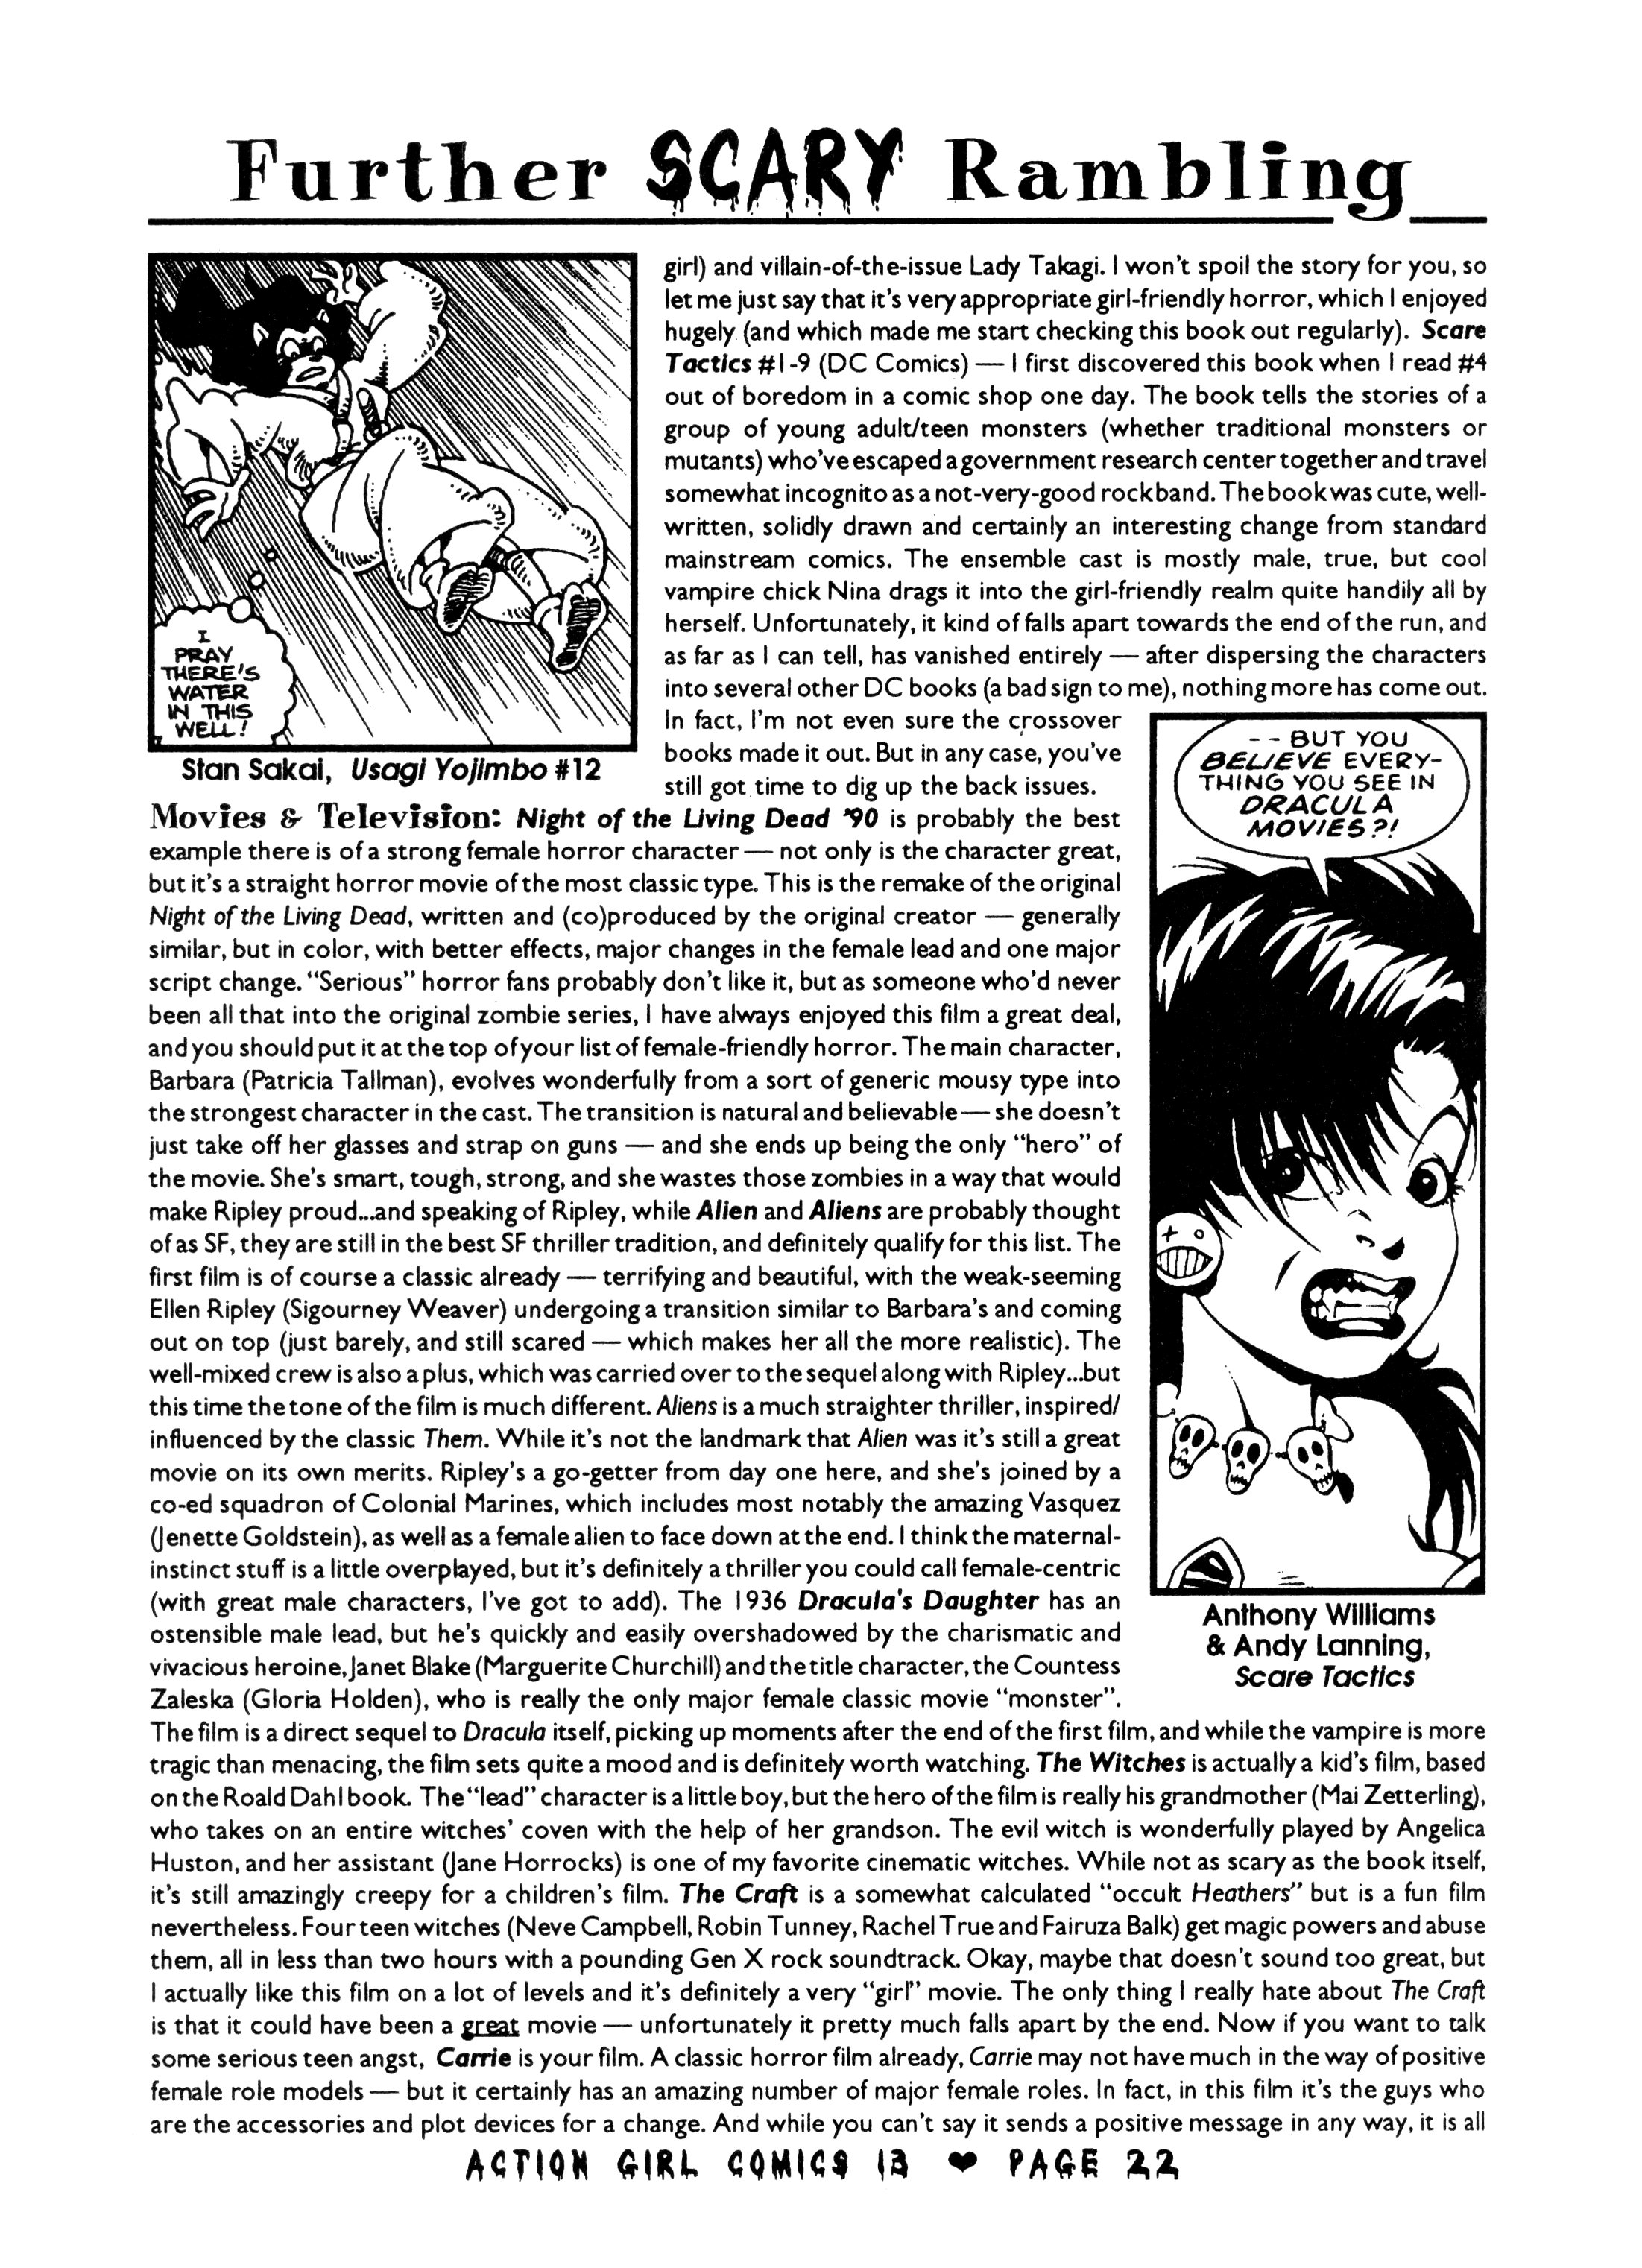 Read online Action Girl Comics comic -  Issue #13 - 24